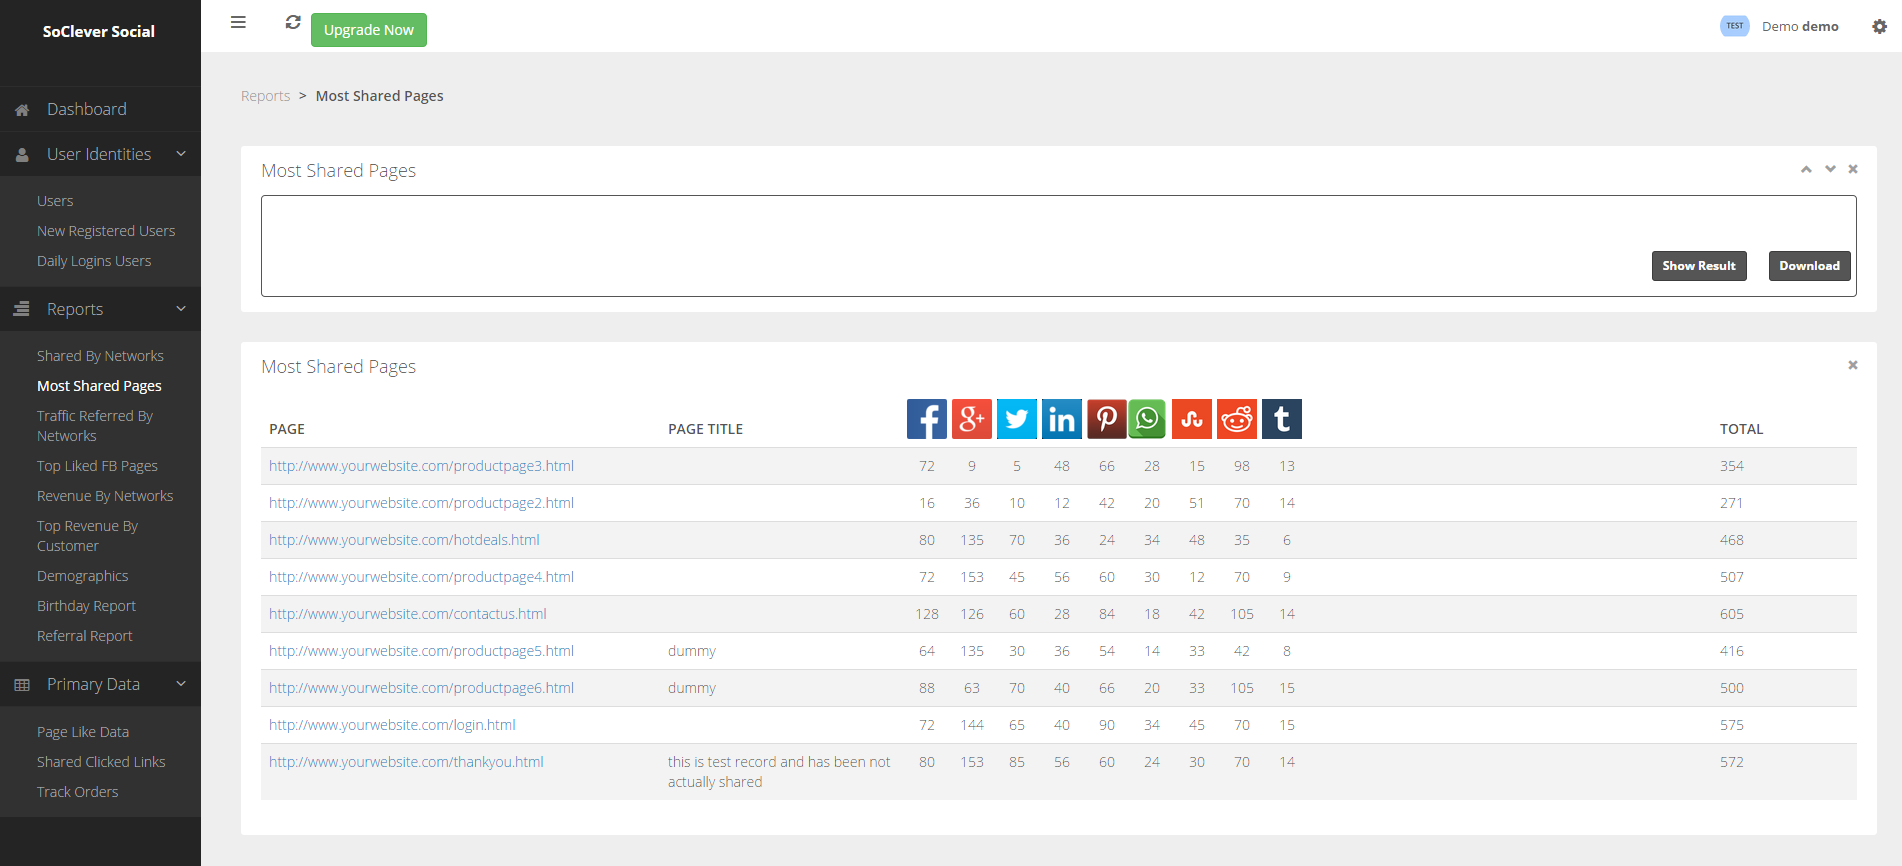 Most Shared Pages Report - Get detailed Most Shared Pages Report on your SoClever Social Dashboard.